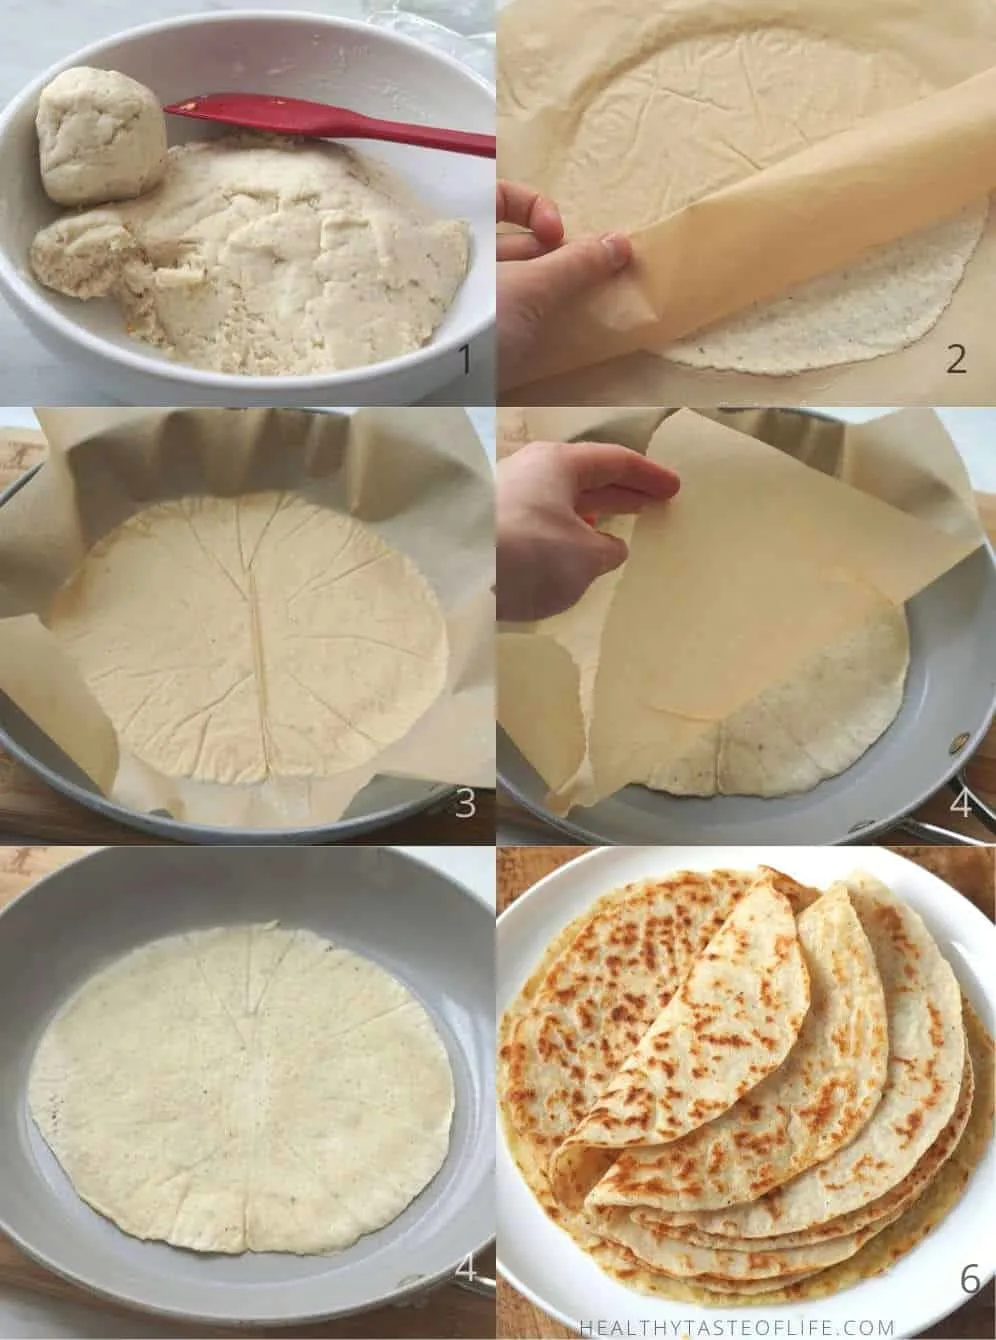 Process shots showing how to make gluten free tortillas wraps with mashed potatoes using parchment paper and a hot non-stick skillet.